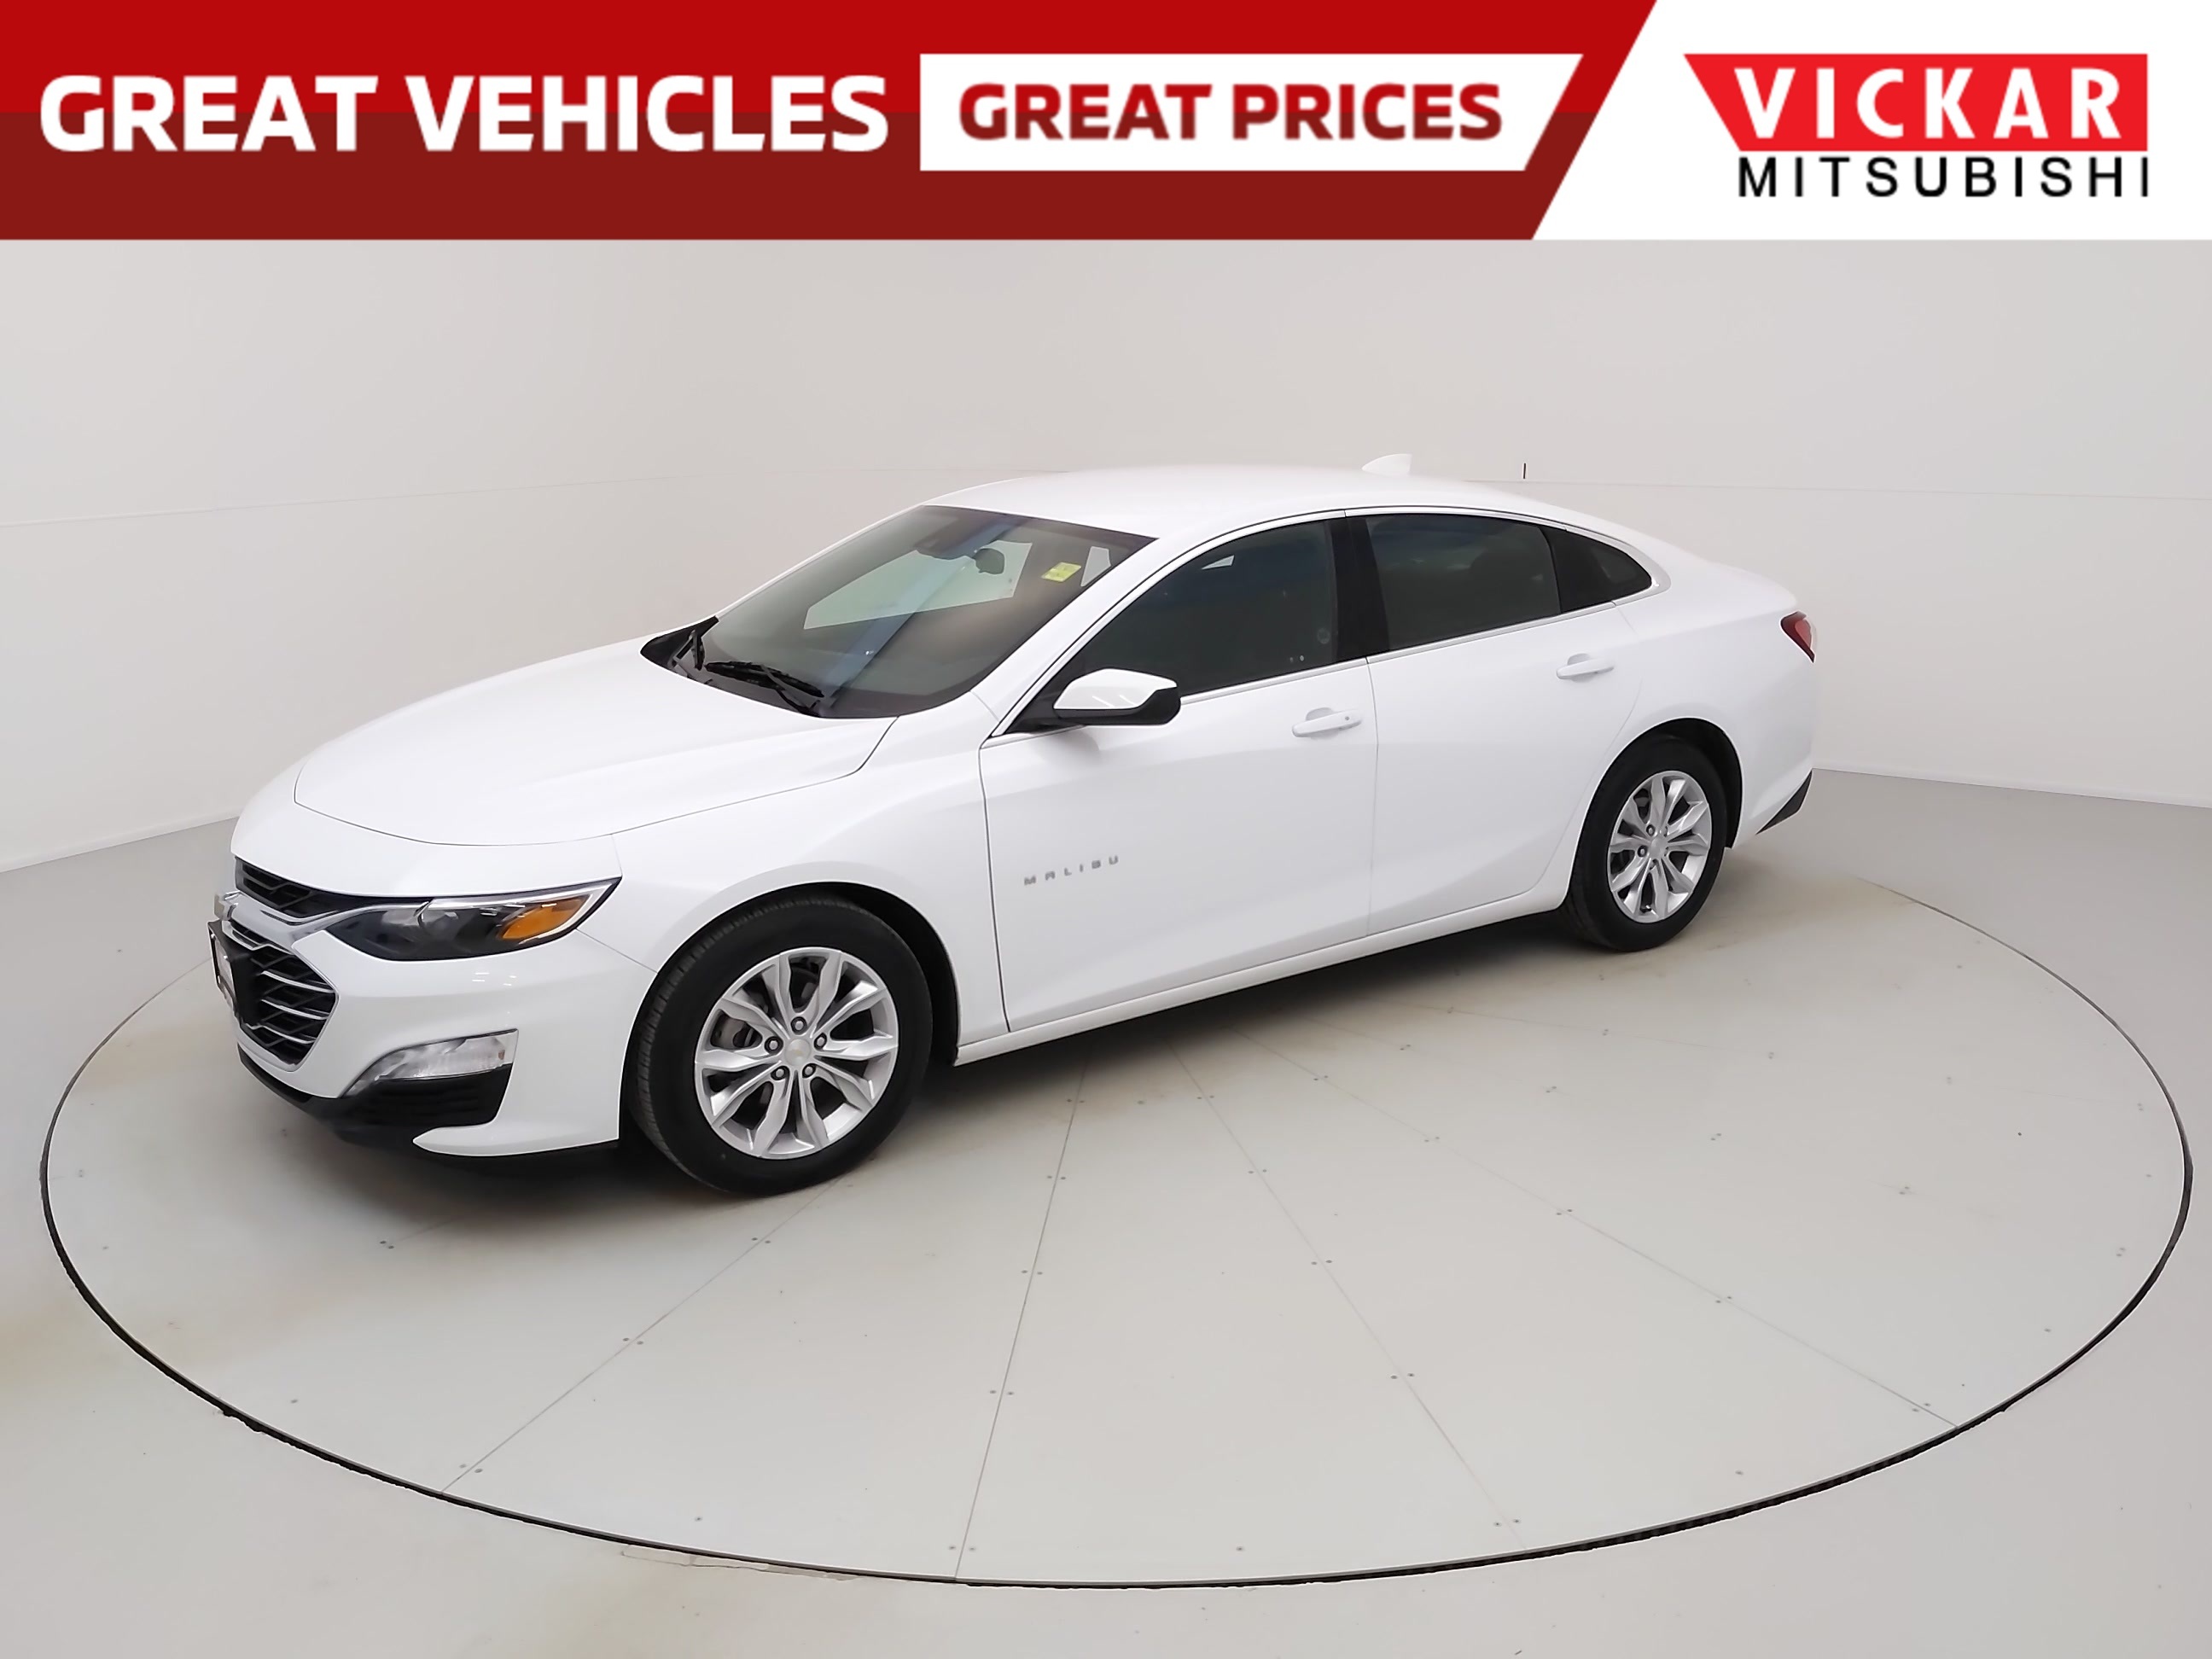 2020 Chevrolet Malibu LT - LOCAL TRADE IN, HEATED SEATS, BACK UP CAM